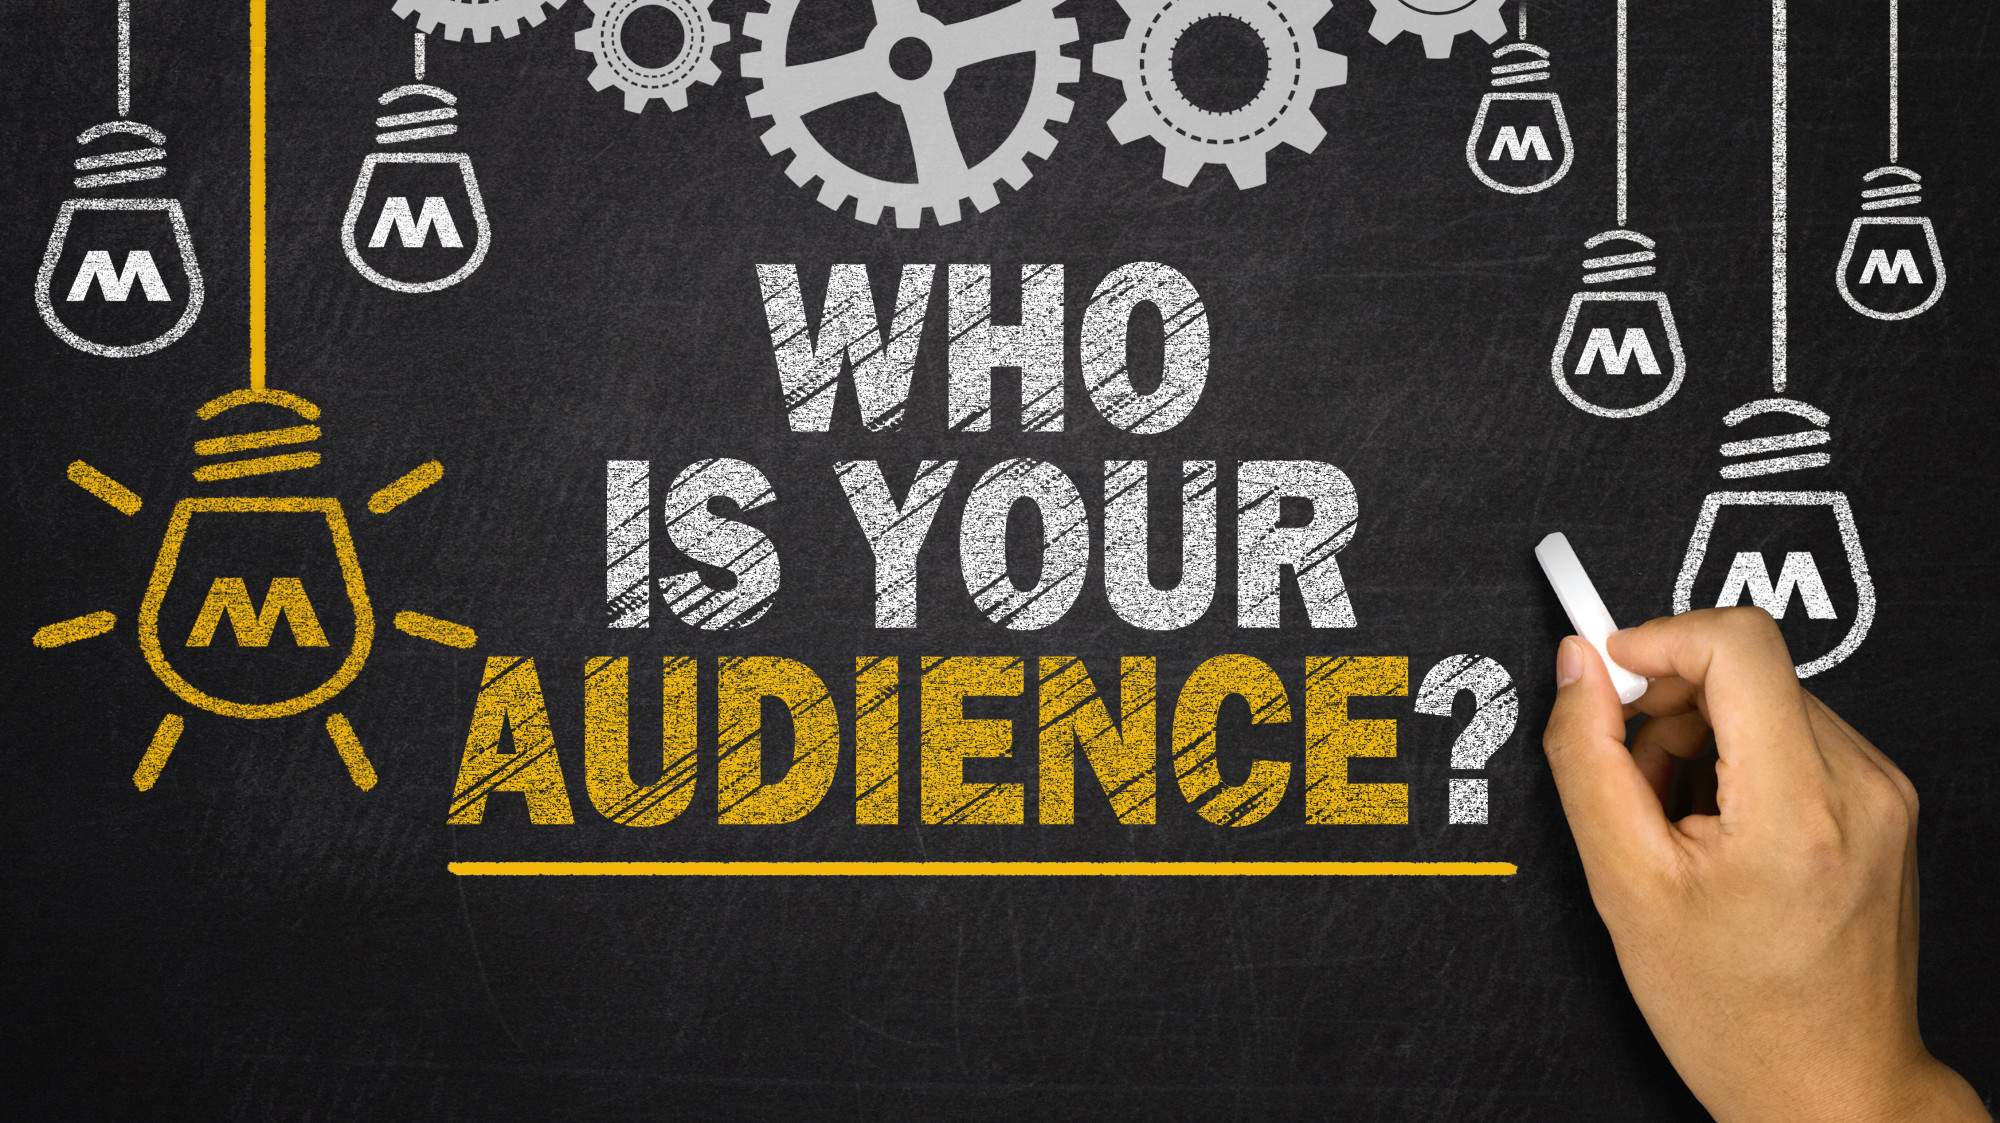 Identifying and Reaching Your Brand’s Target Audiences